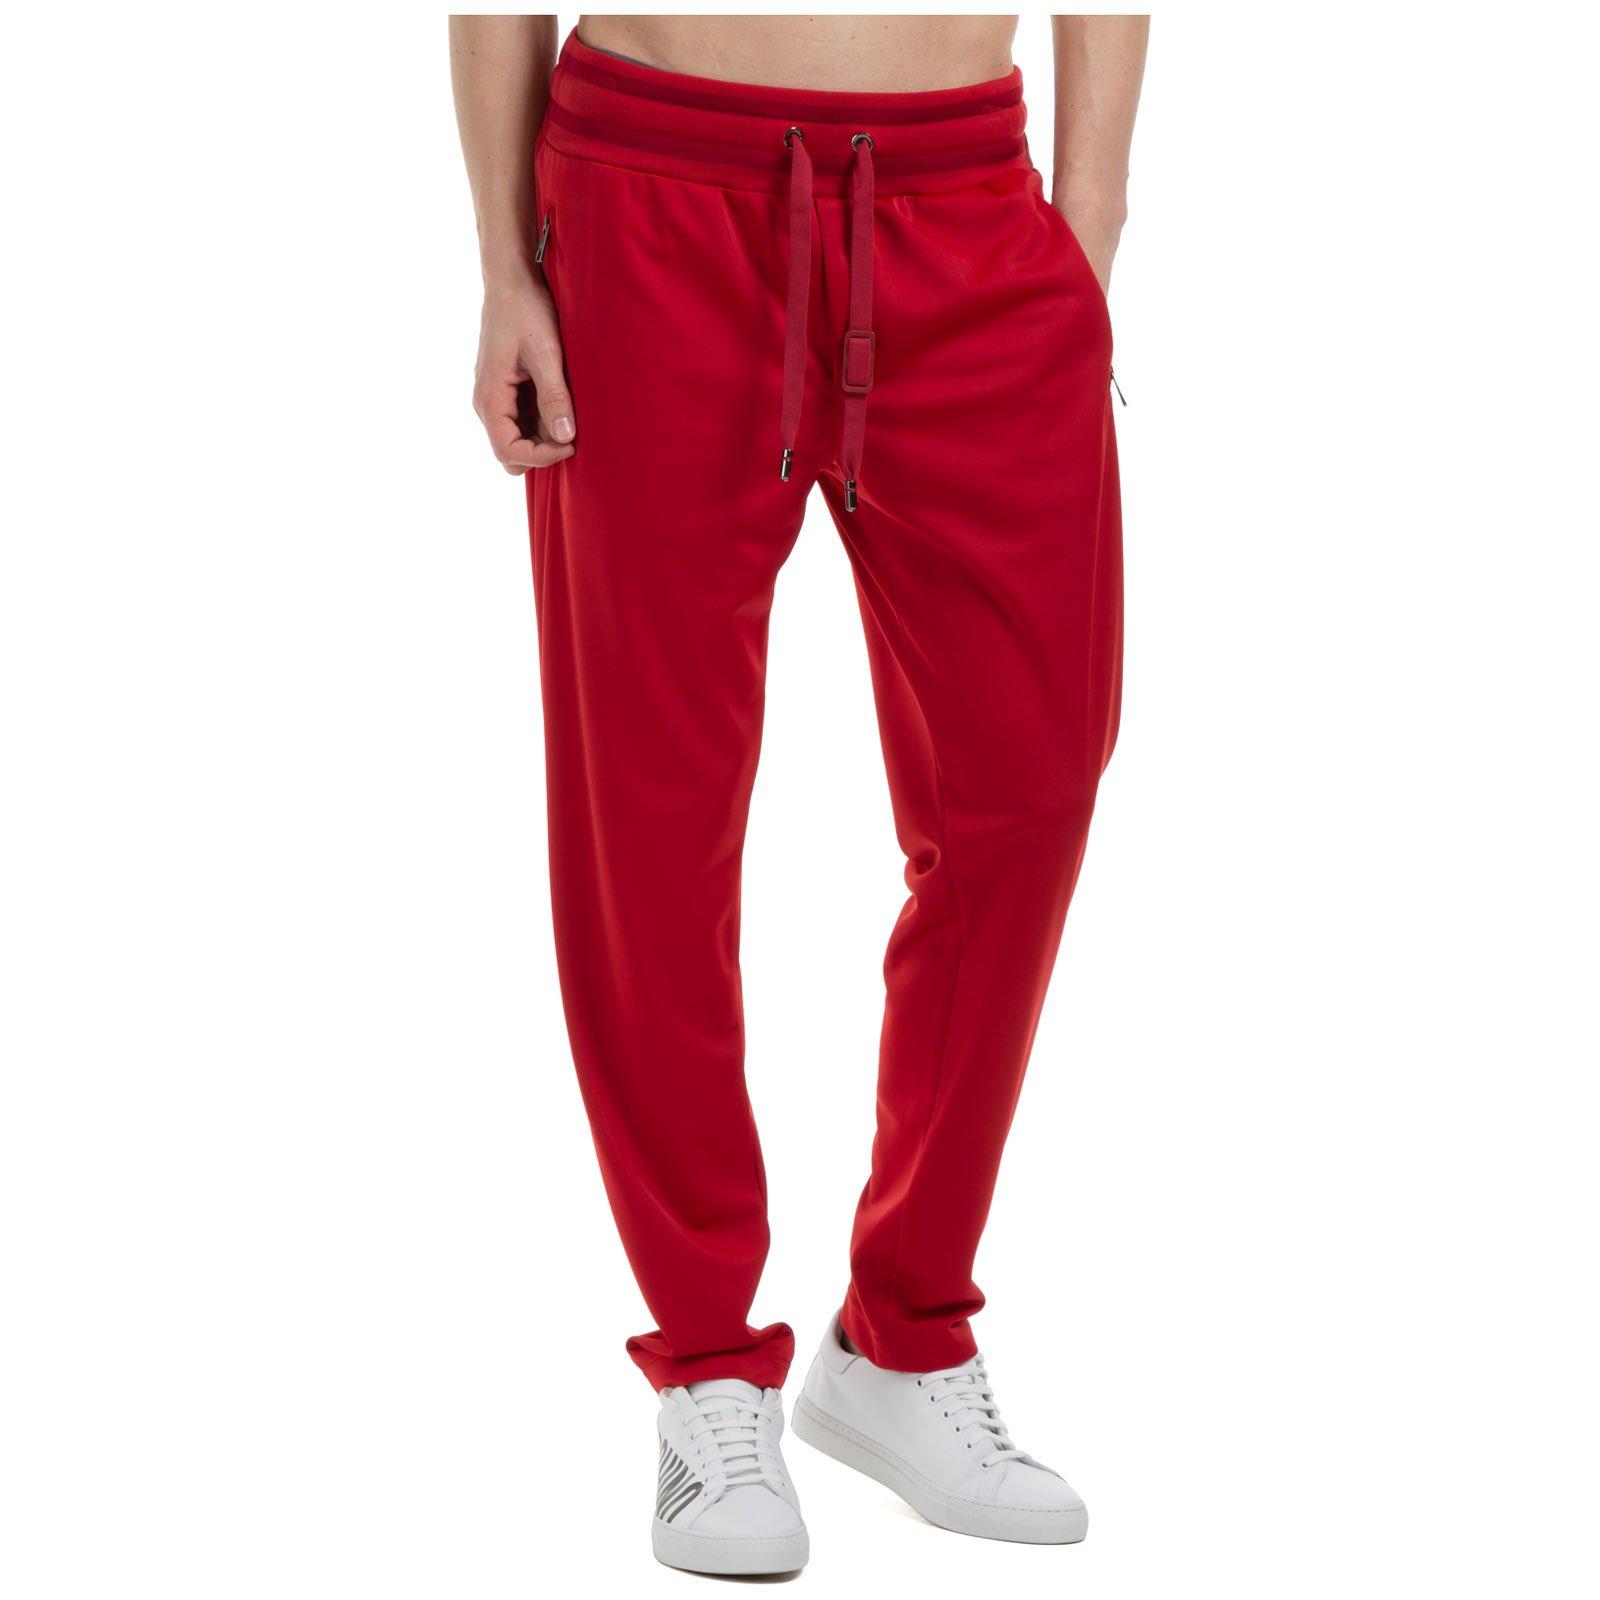 Dolce & Gabbana Synthetic Drawstring Sweatpants in Red for Men - Lyst